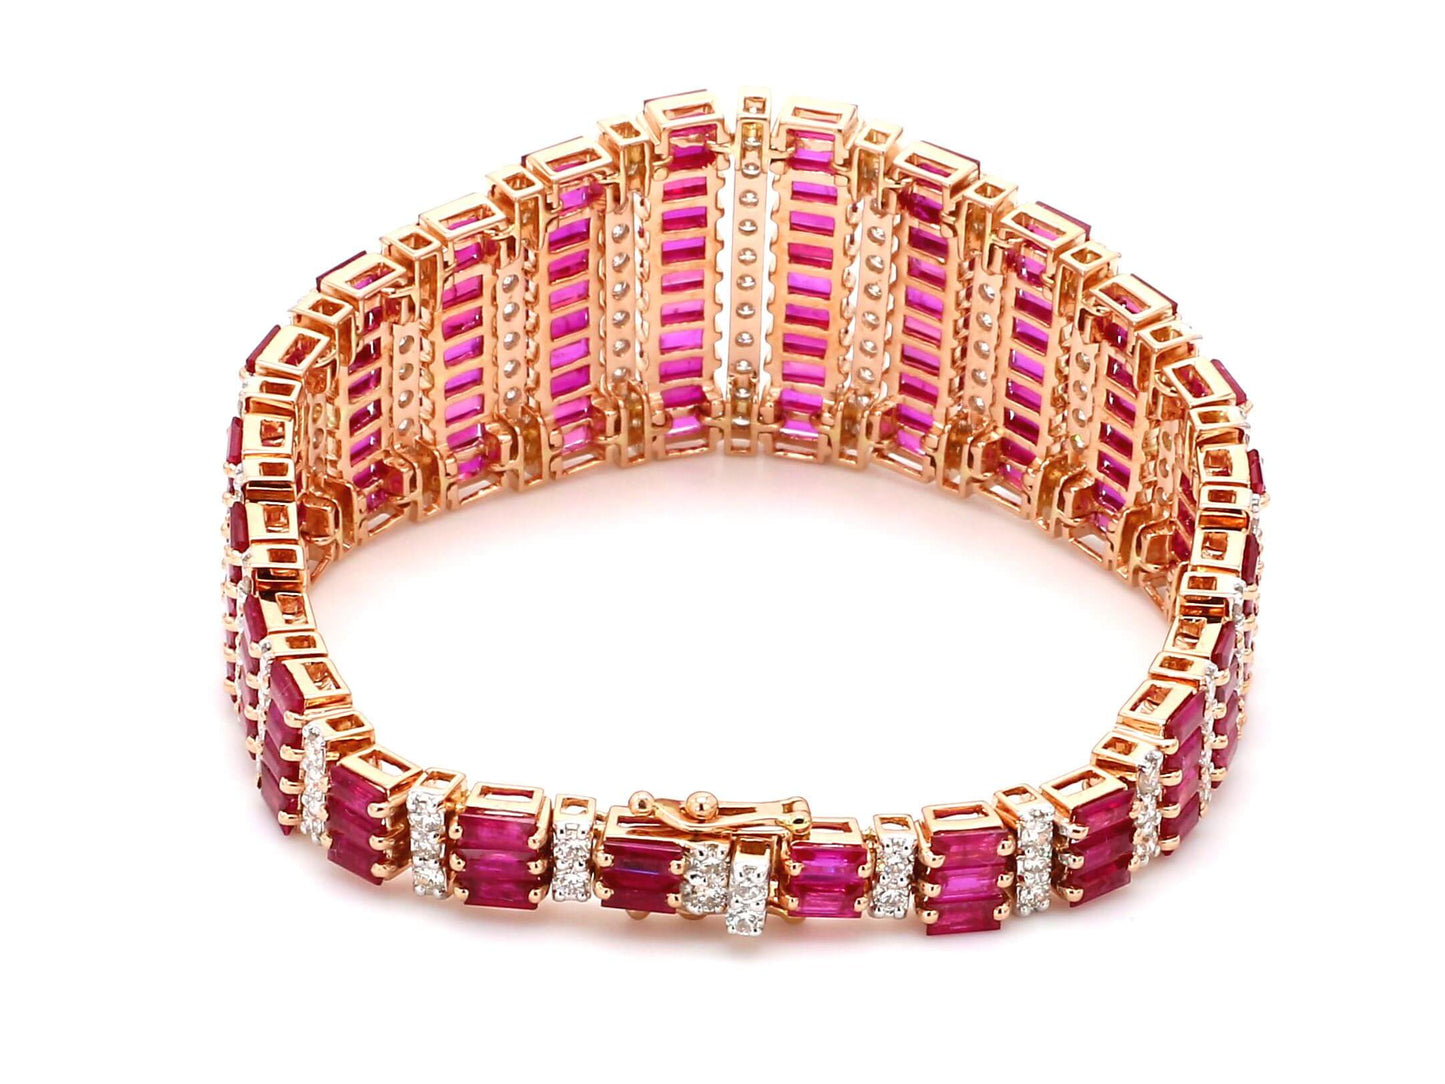 Red Carpet Bracelet in Rose Gold with Ruby